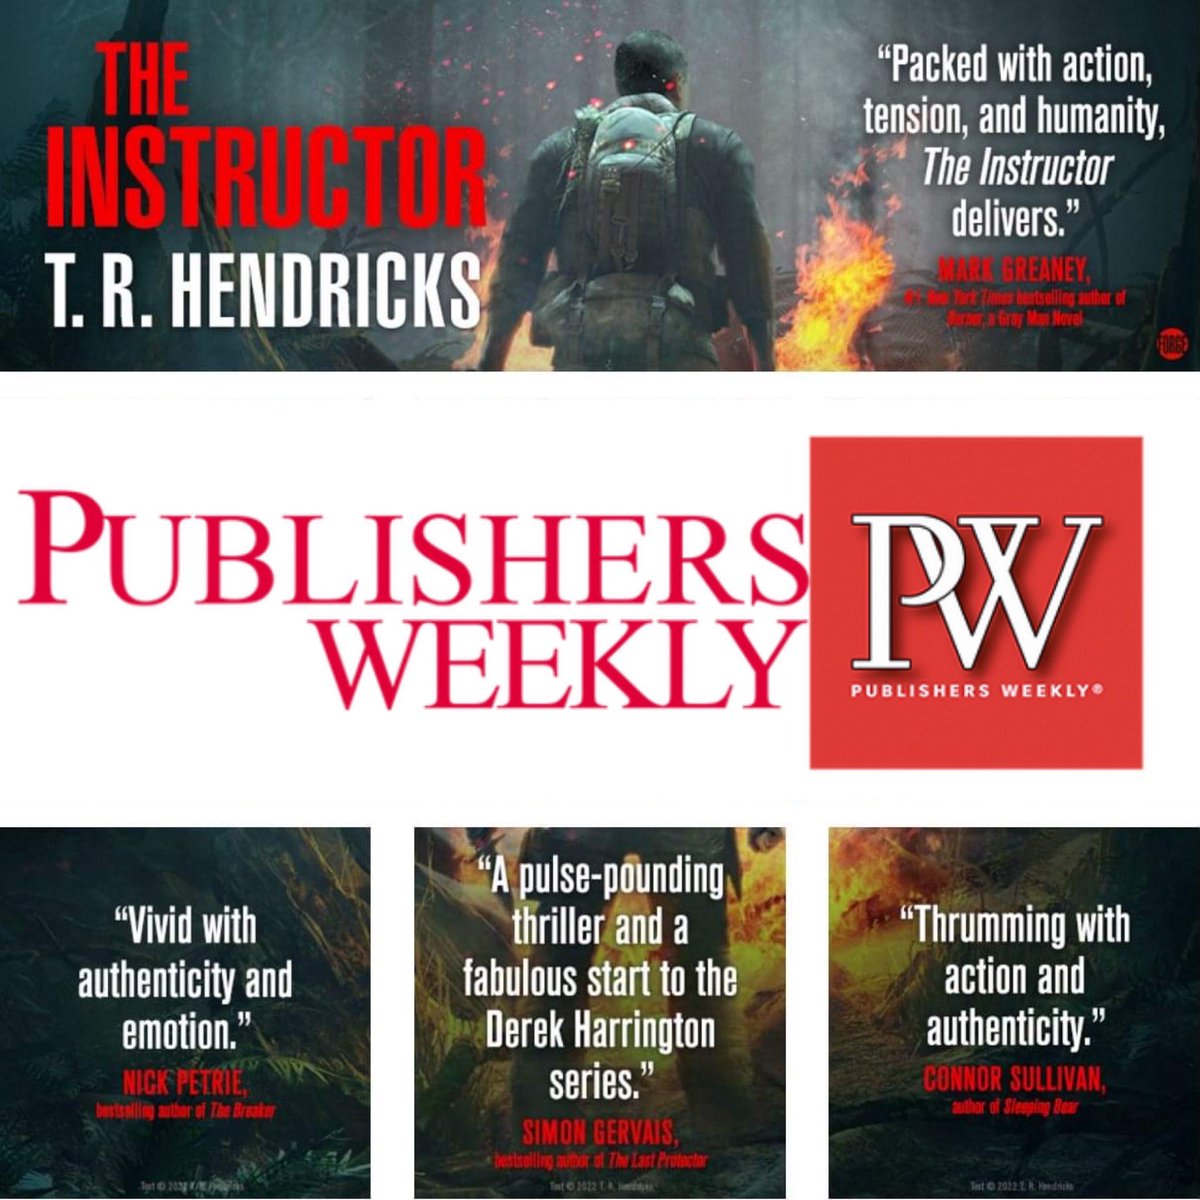 In less than a week T.R. Hendricks first book will drop and I'm excited. For fans of the military thriller genre this looks promising. Is this the next Jack Carr? We'll find out on April 11th. #pimvanofferen #DerekHarrington @TR_Hendricks #militarybooks